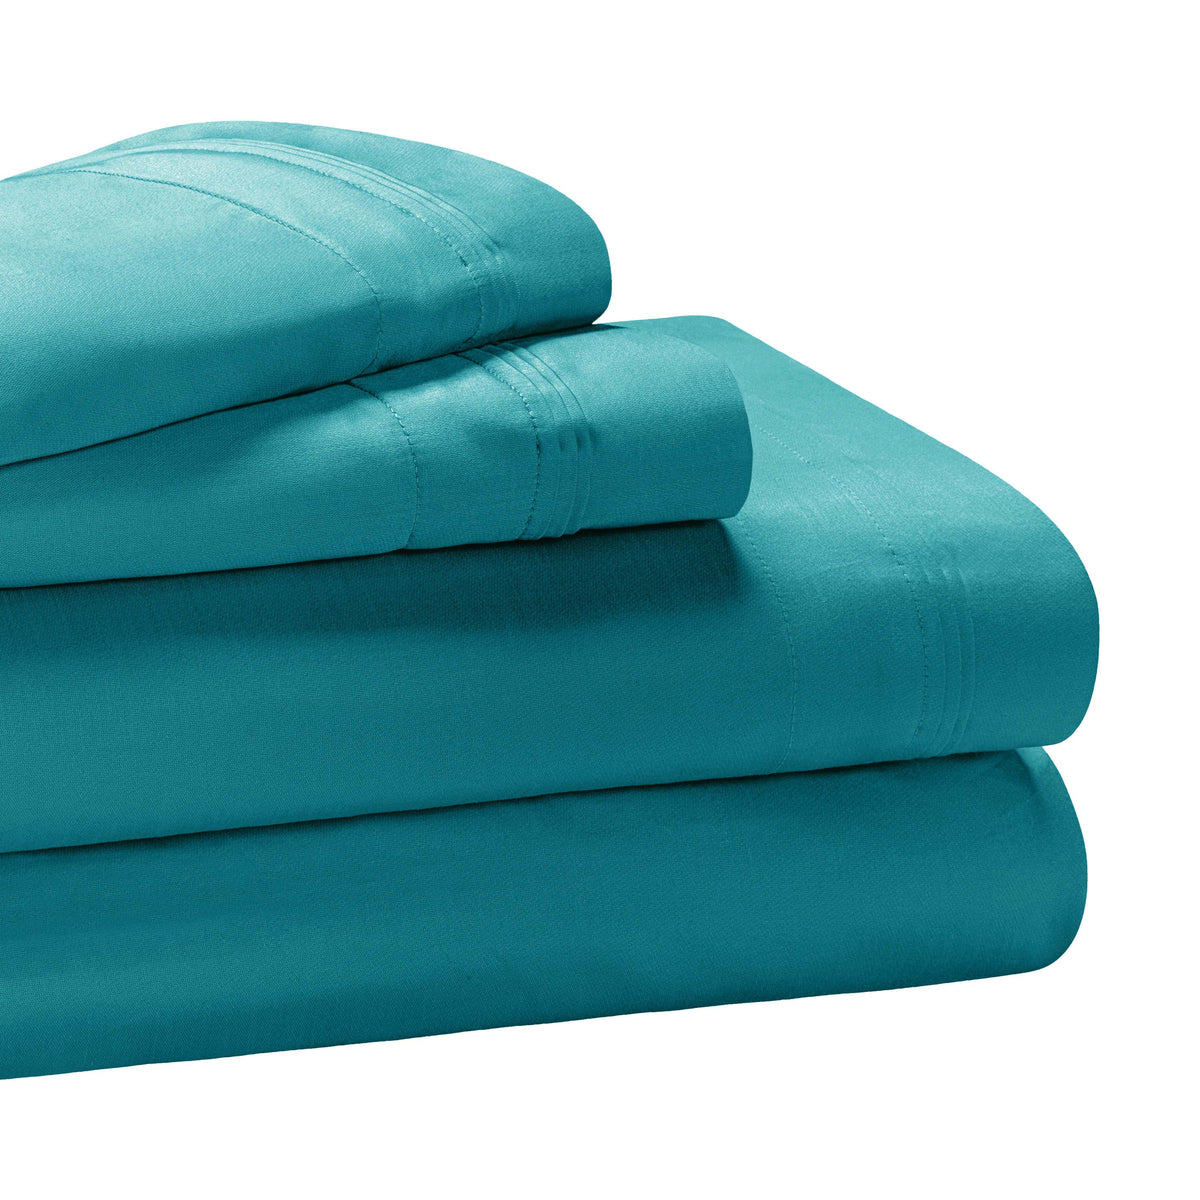 Egyptian Cotton 650 Thread Count Eco-Friendly Solid Sheet Set - Caribbean